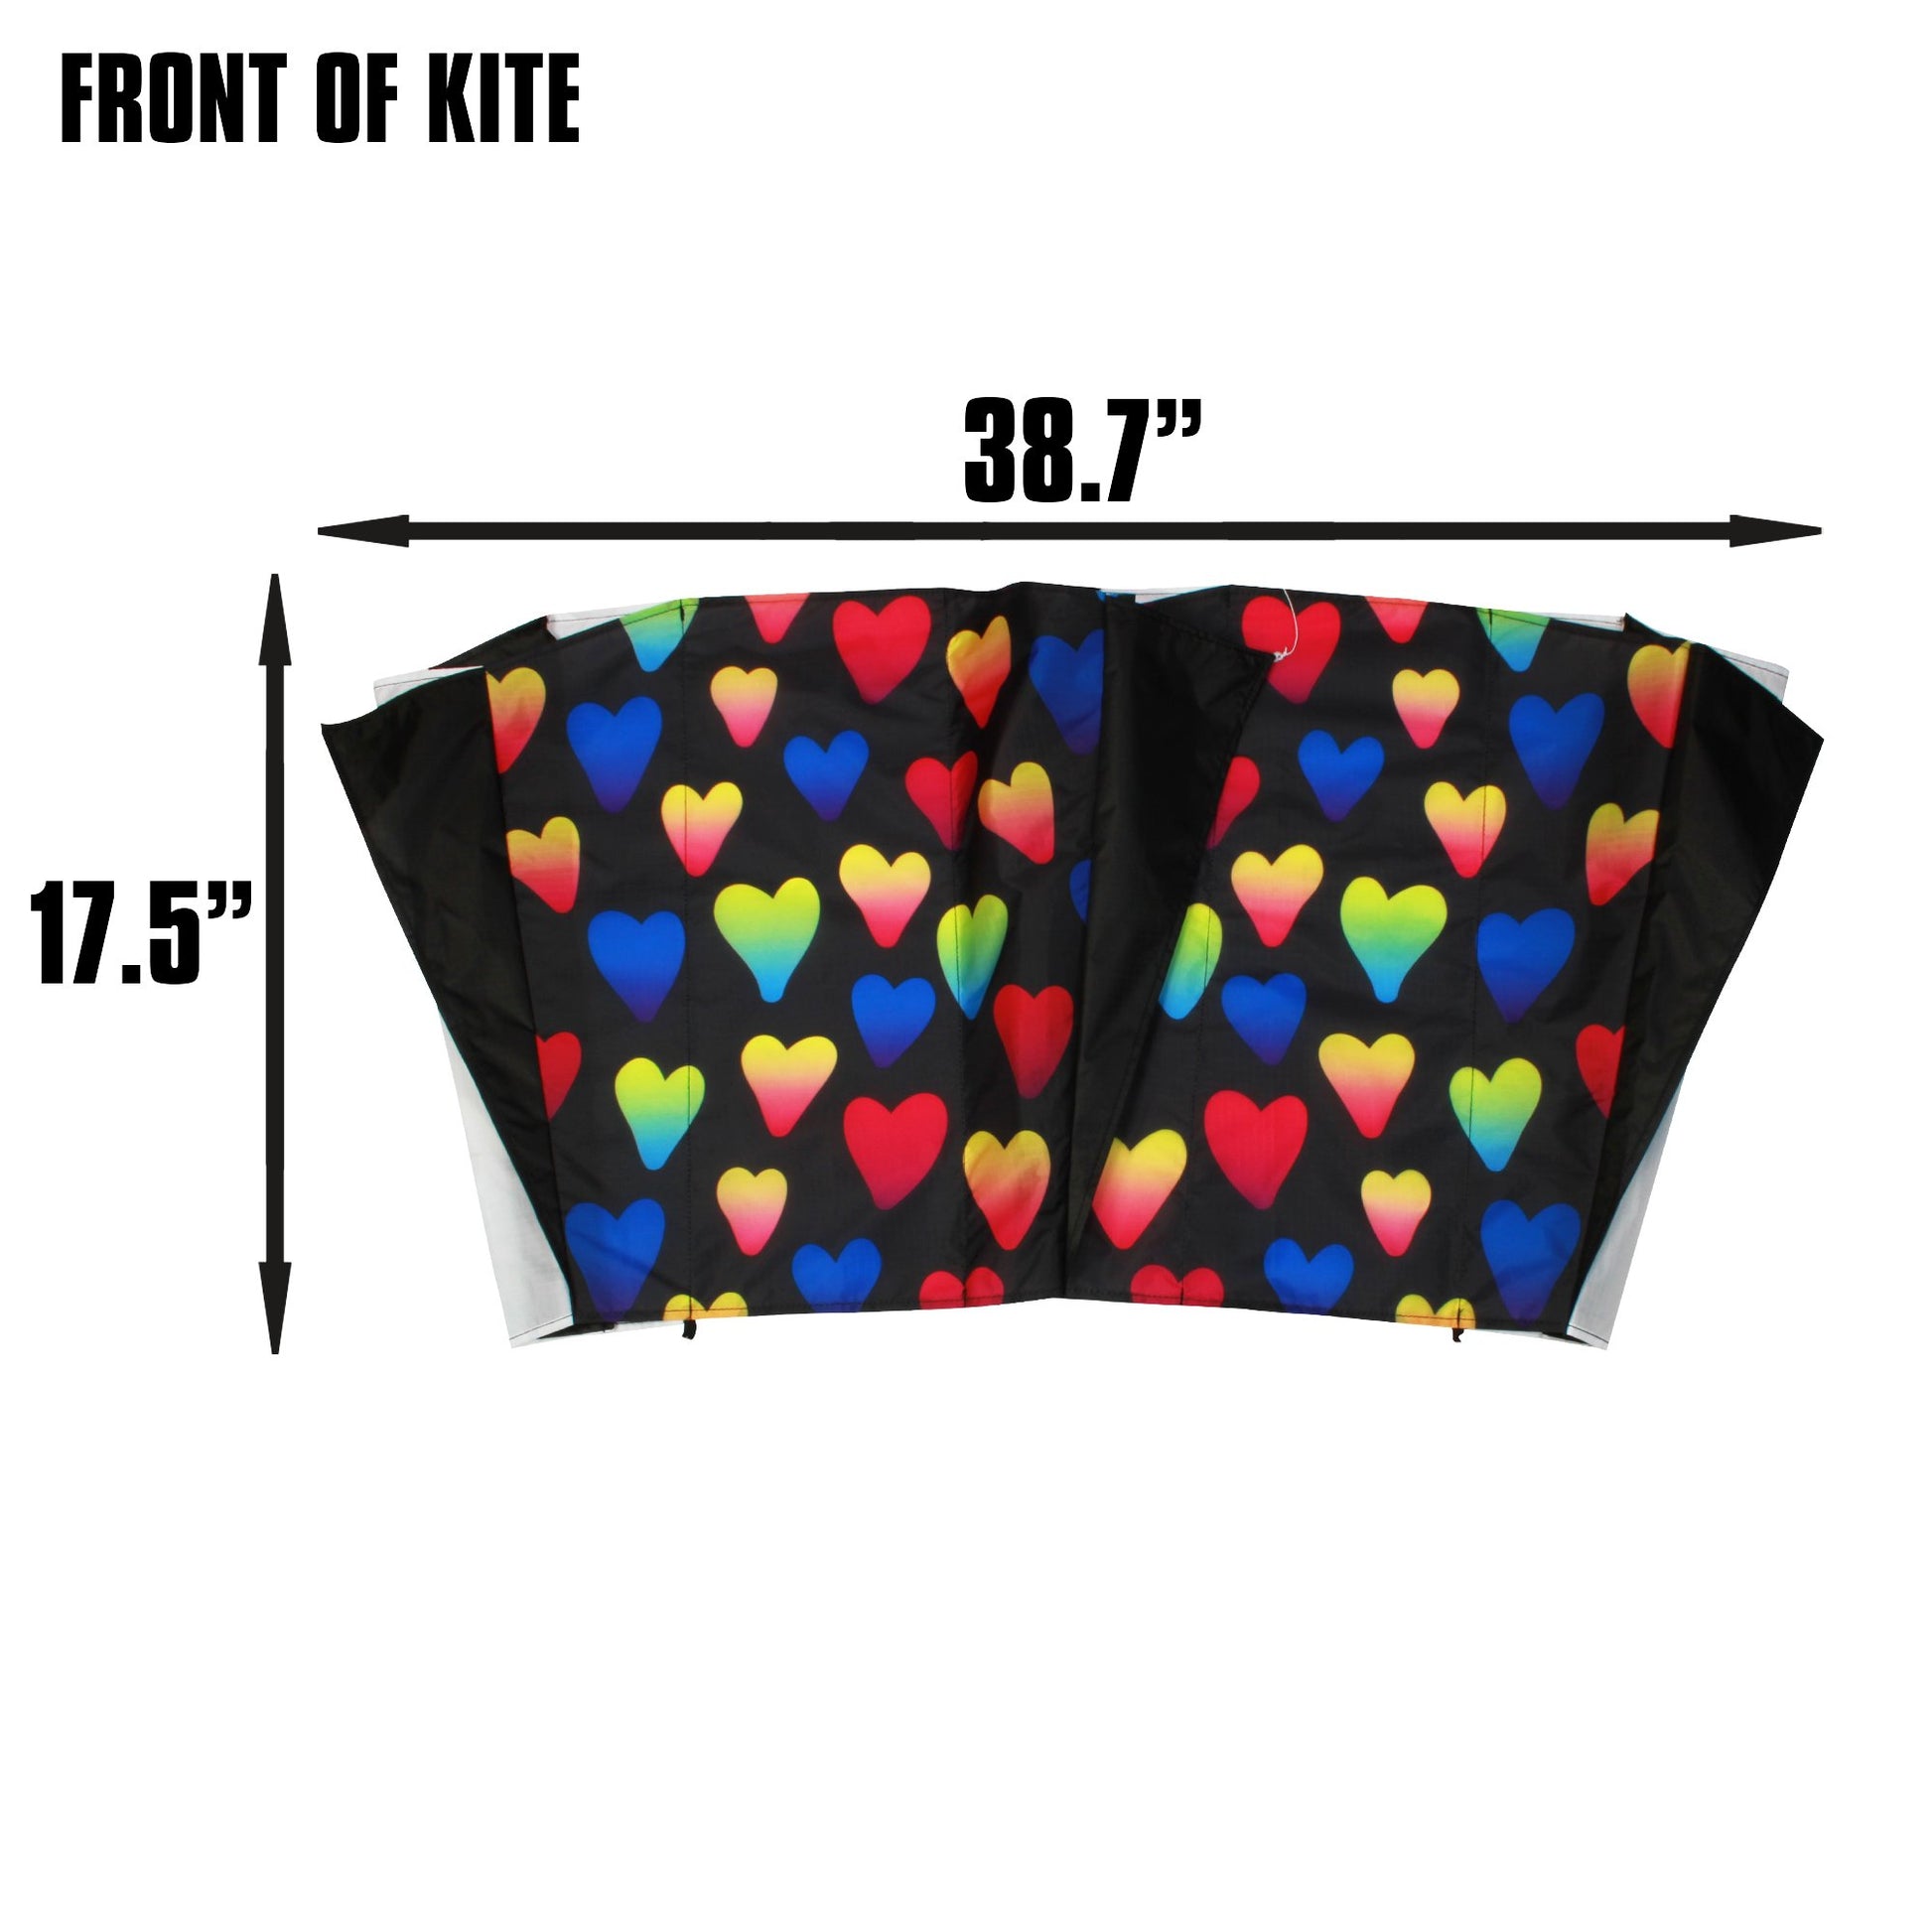 X Kites SkyFoil Hearts + Pocket Kite Circles Parafoil Kite Bundle - No Assembly Required photo of product in use